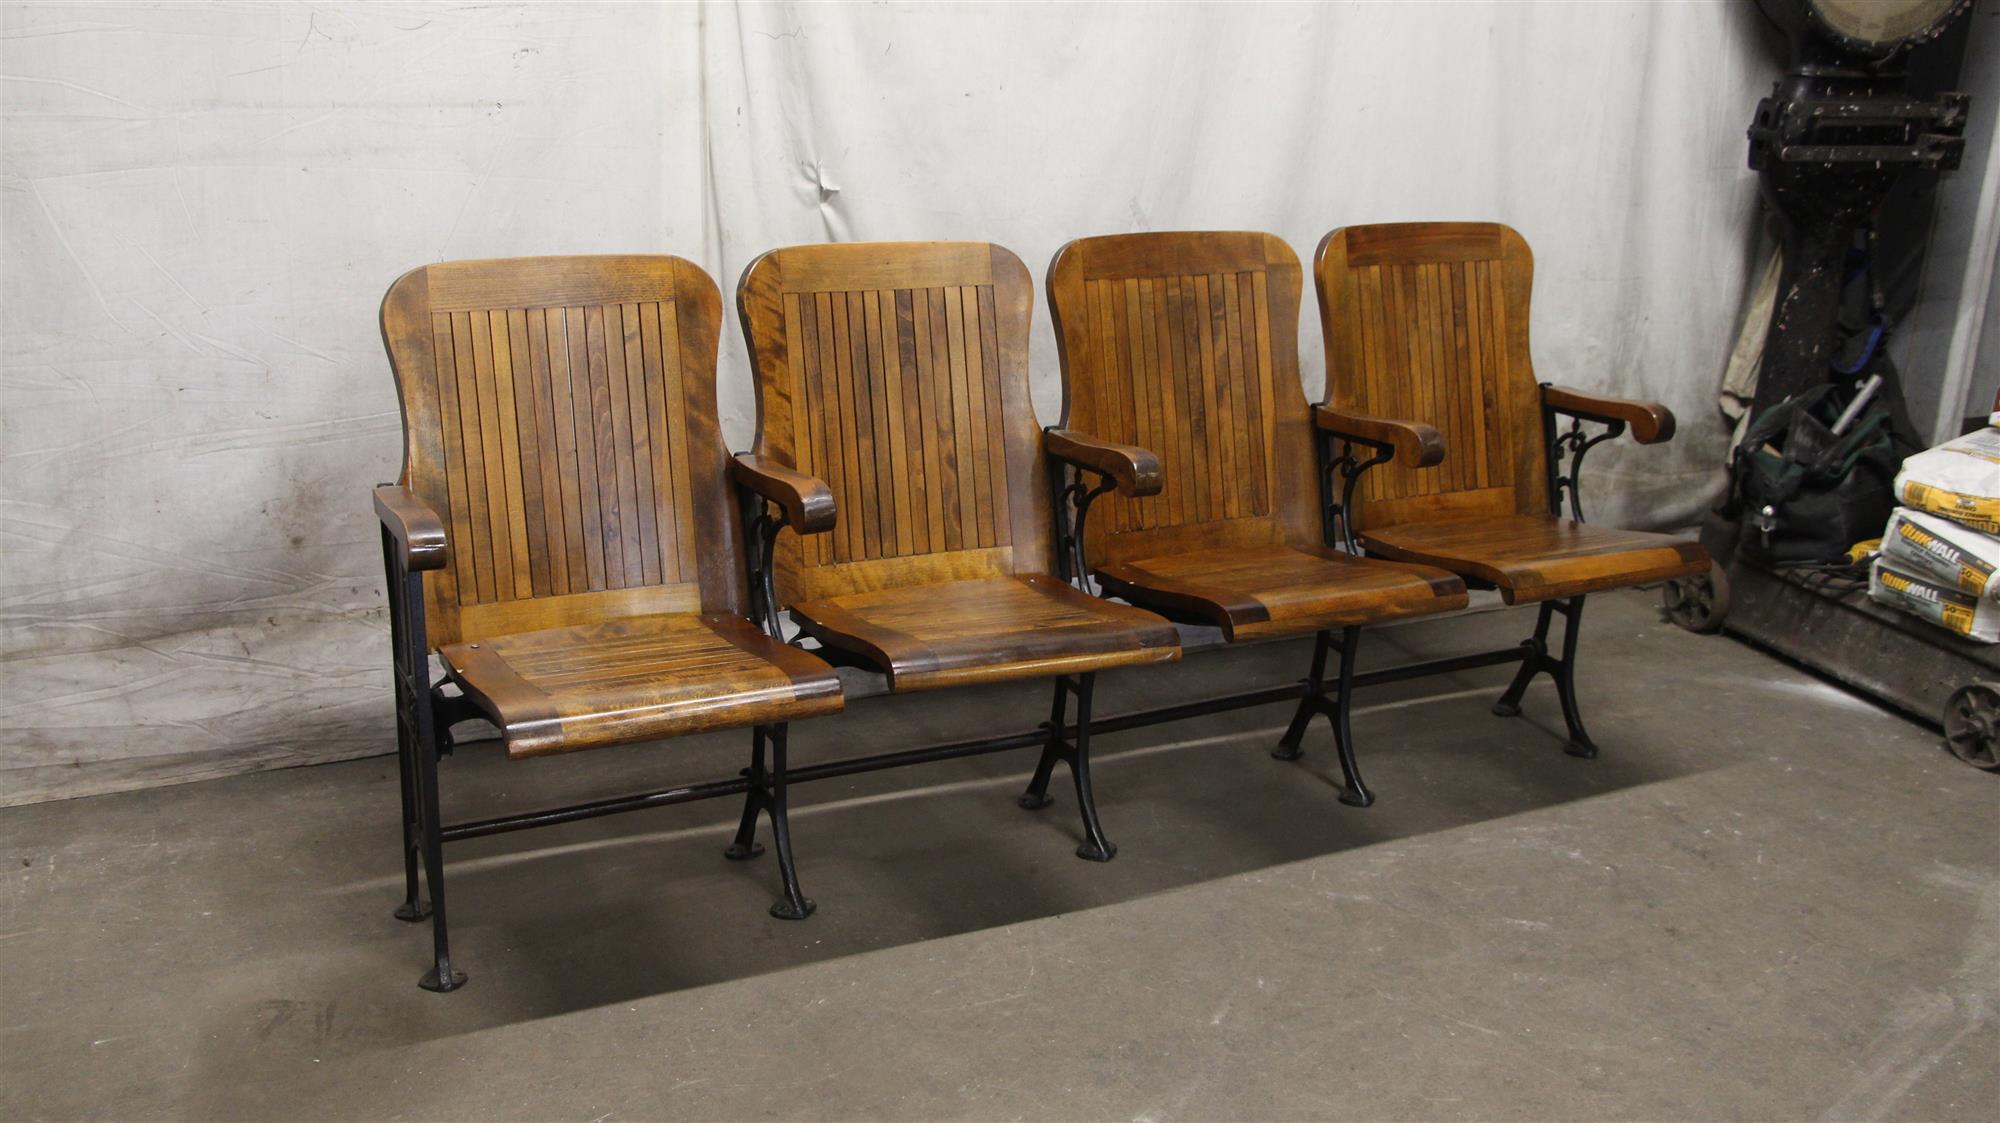 Industrial Eric, 1905 Four Seat Folding Theater Chairs with Cast Iron Frame from Brooklyn